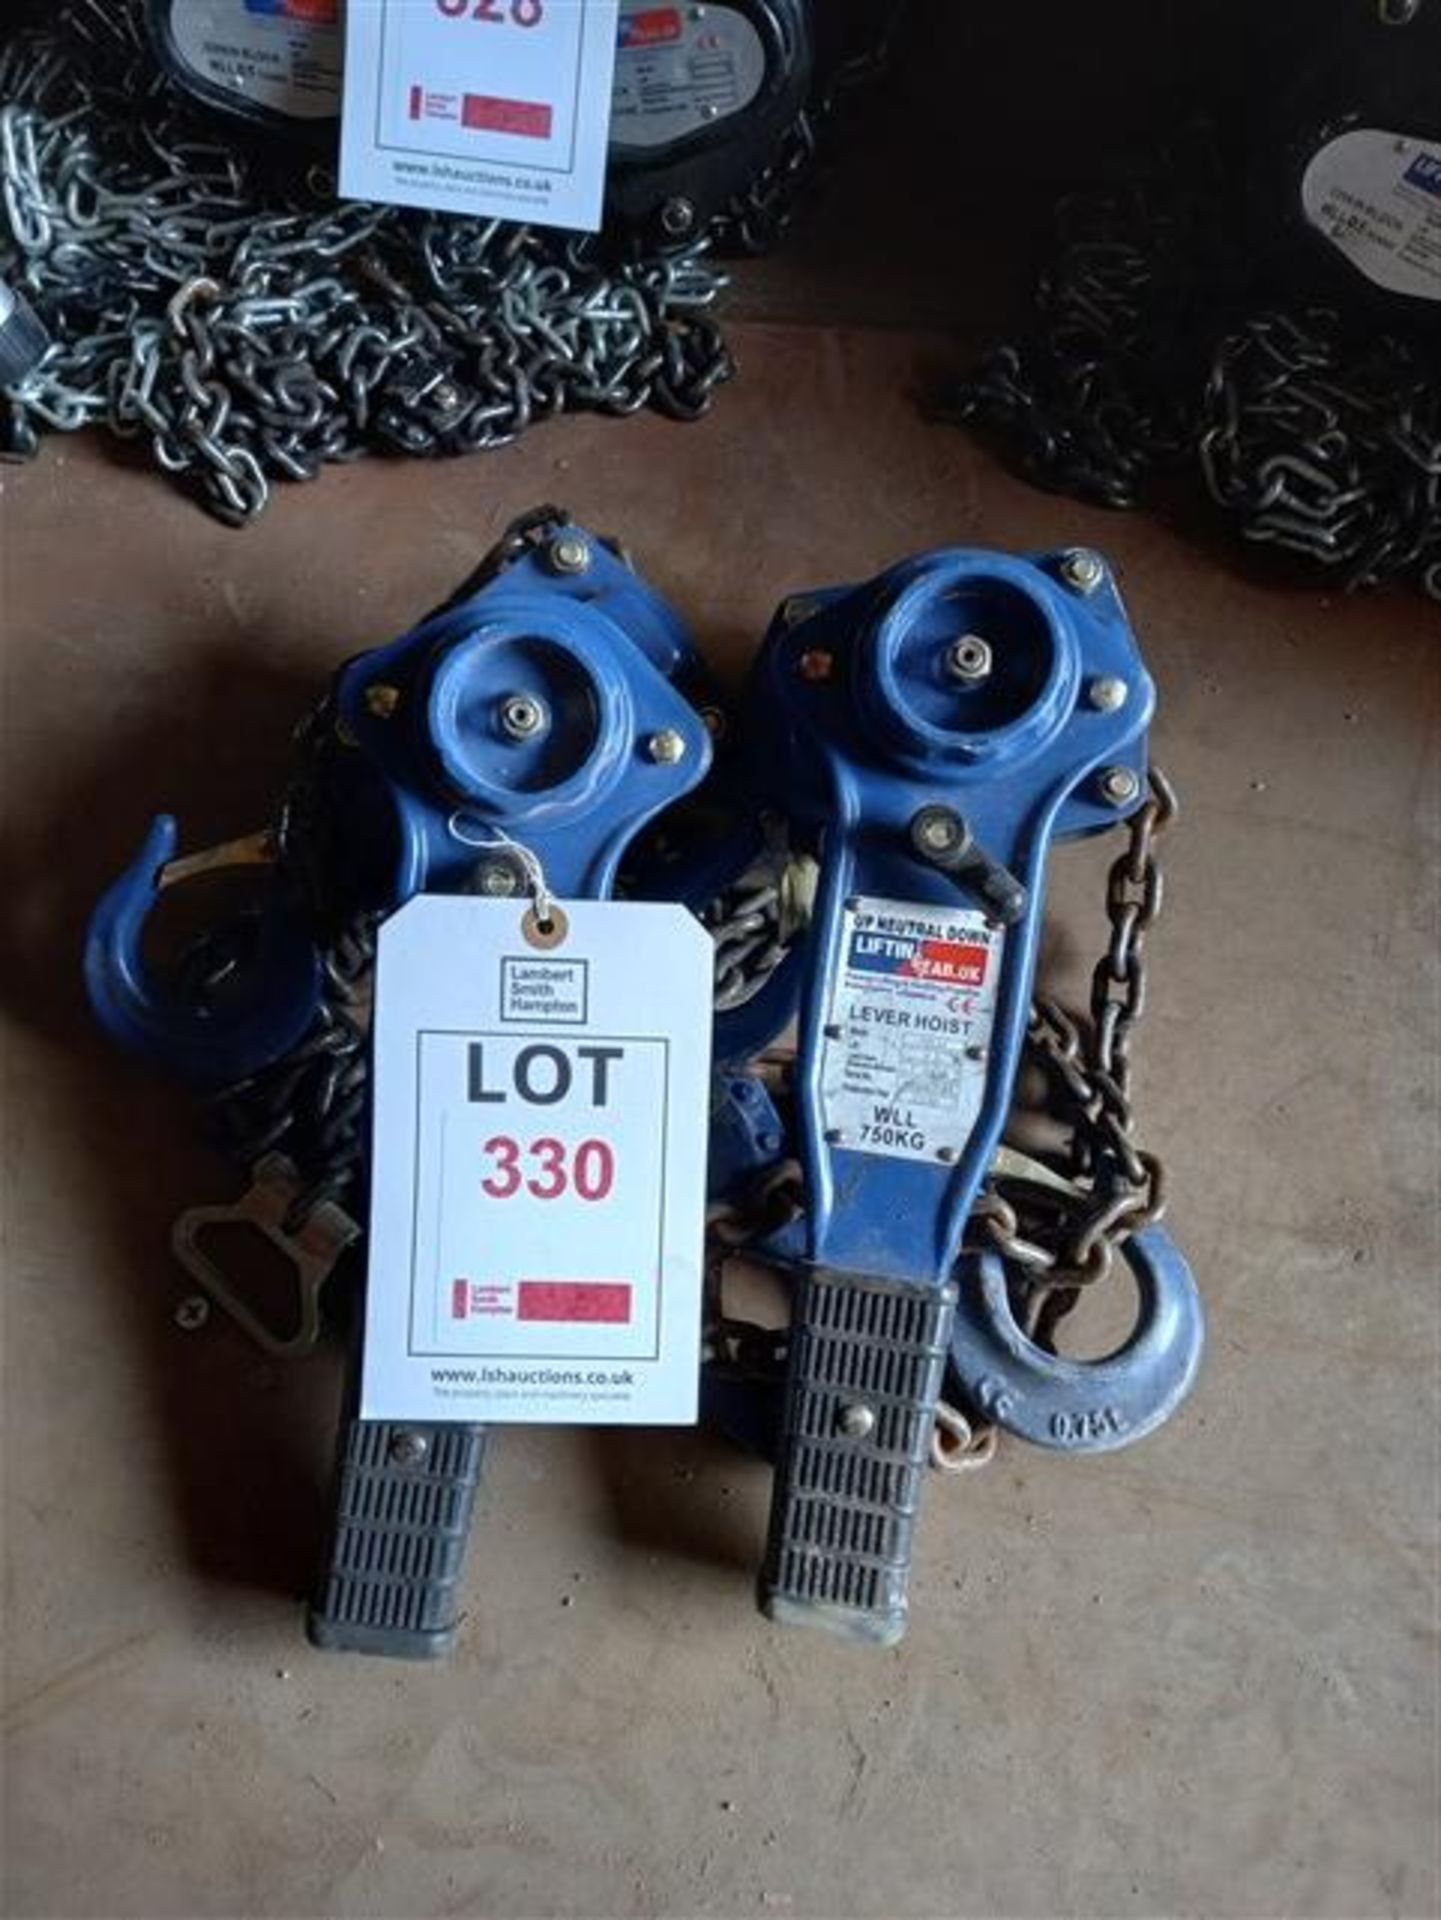 2 x Lifting Gear VLH lever hoist with 1.5m lift and T6x18 load chain, serial numbers 491021139 &